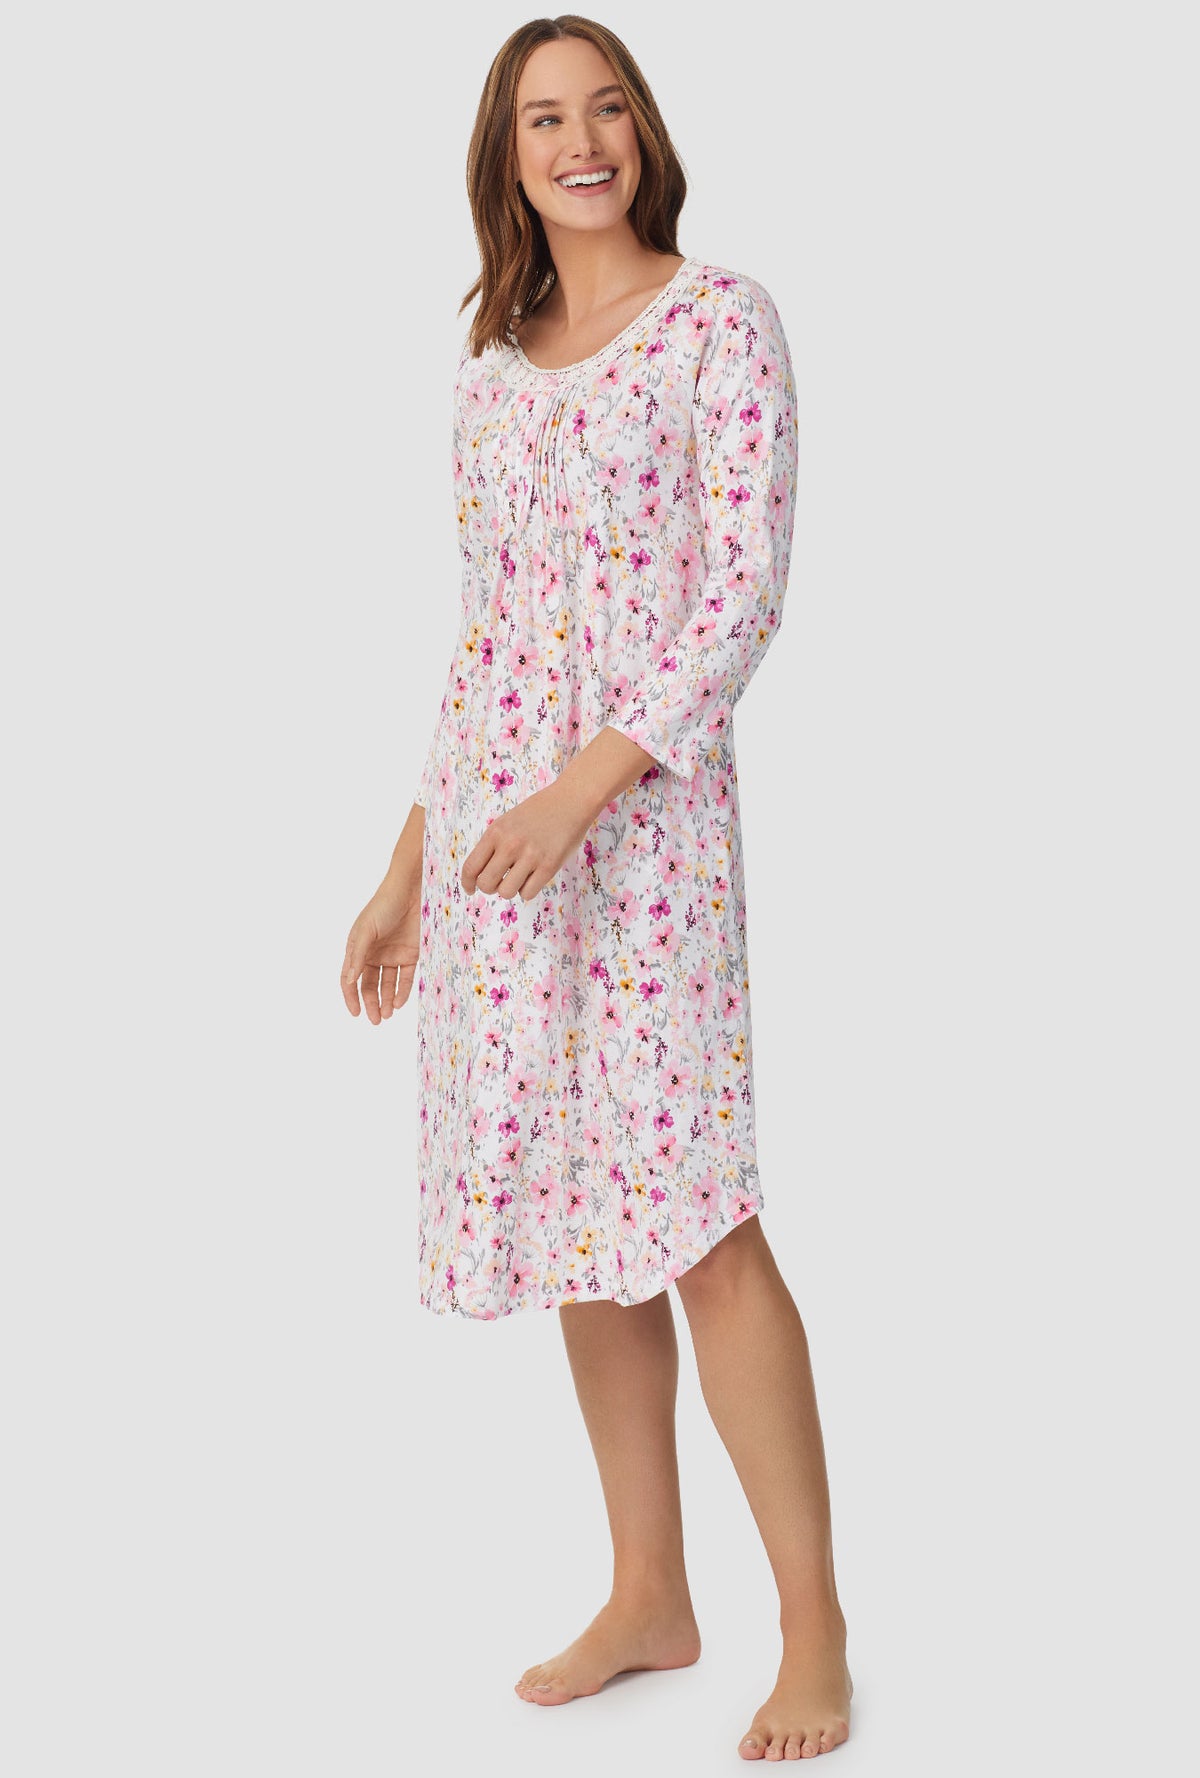 Pink and Magenta Floral 3/4 Sleeve Nightgown